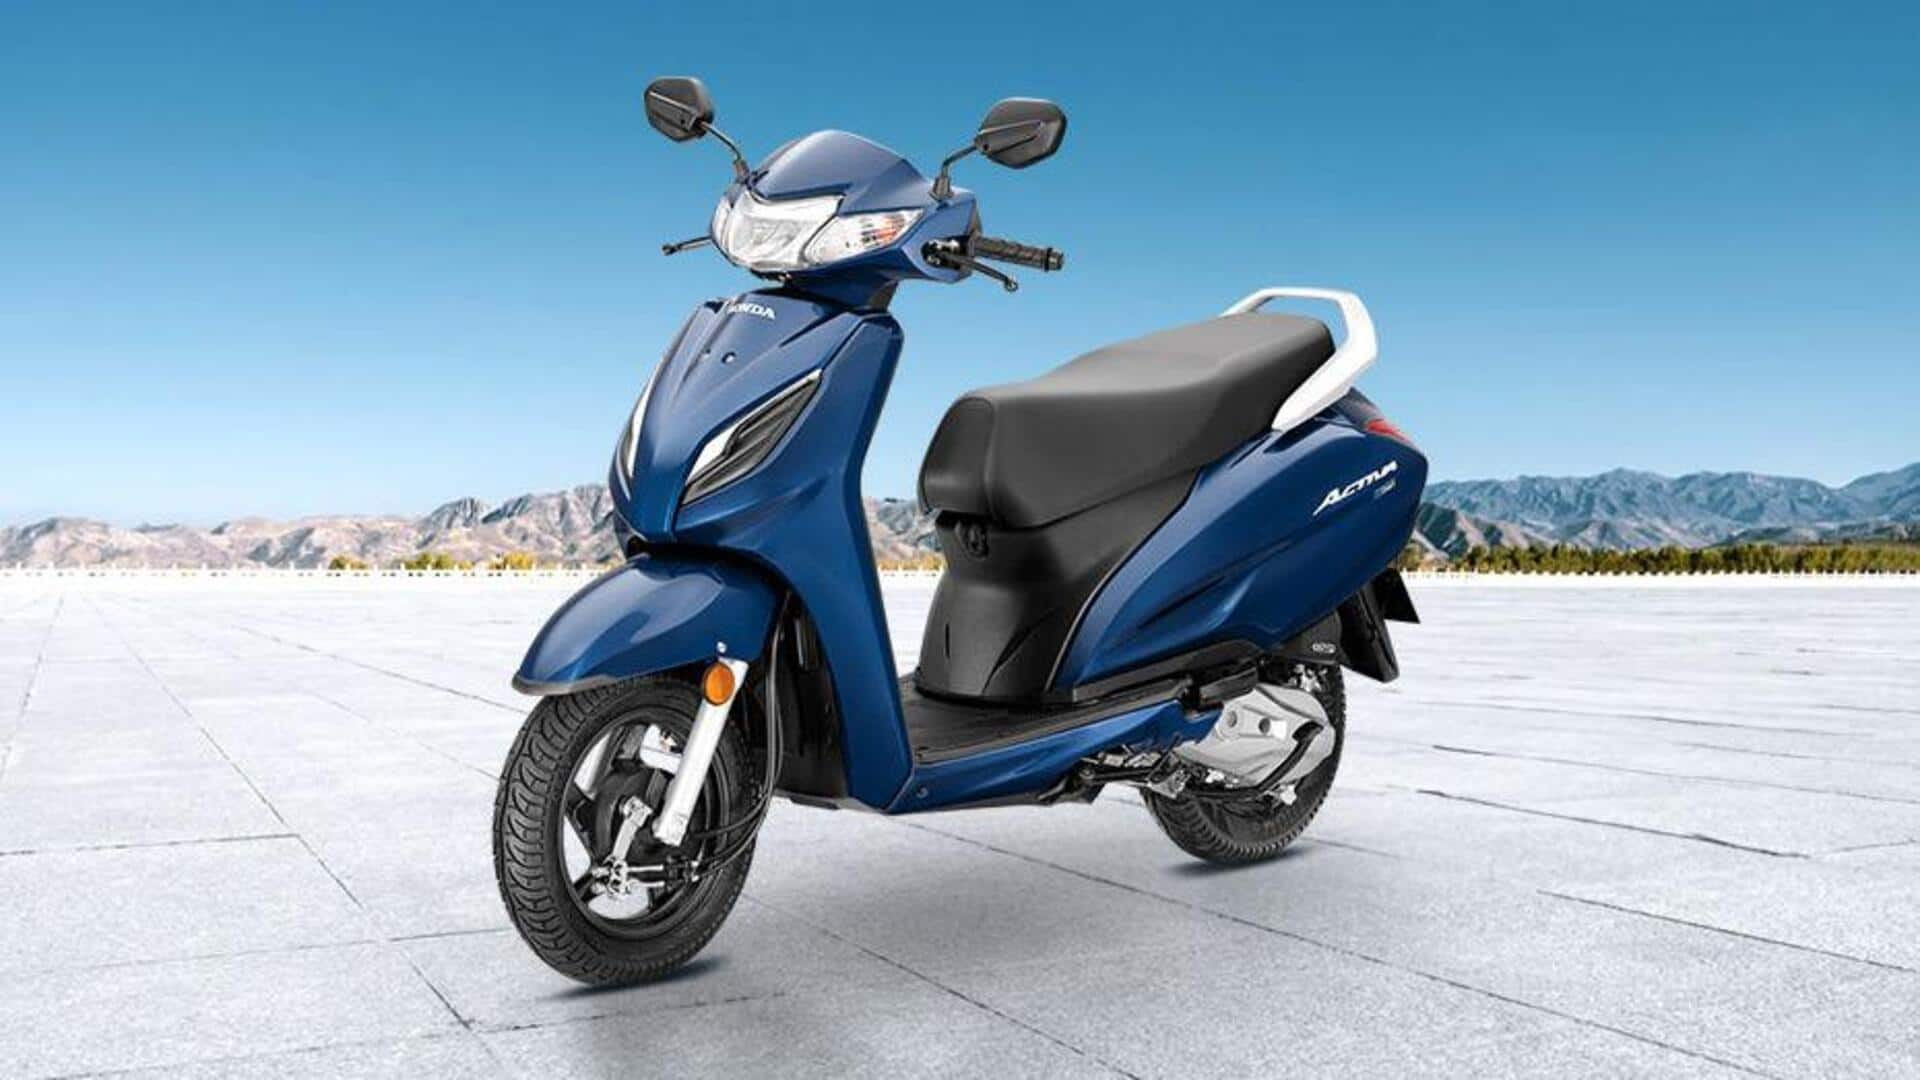 Top-selling scooters this February: Honda, TVS, Hero MotoCorp, and more